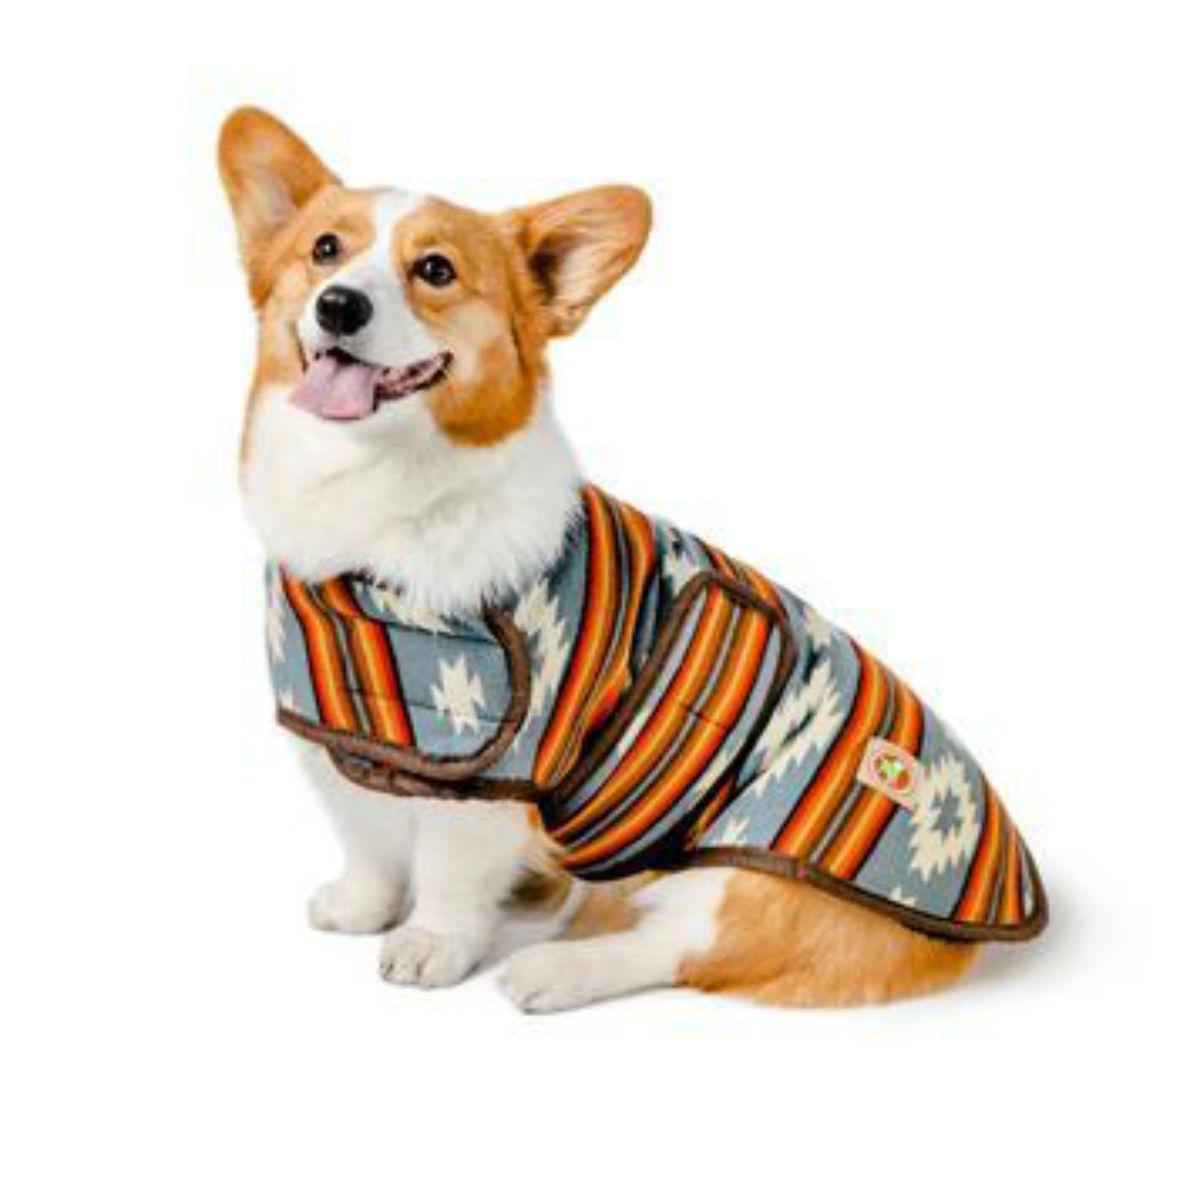 Camp Maple Leaf Dog Sweater - Chilly Dog